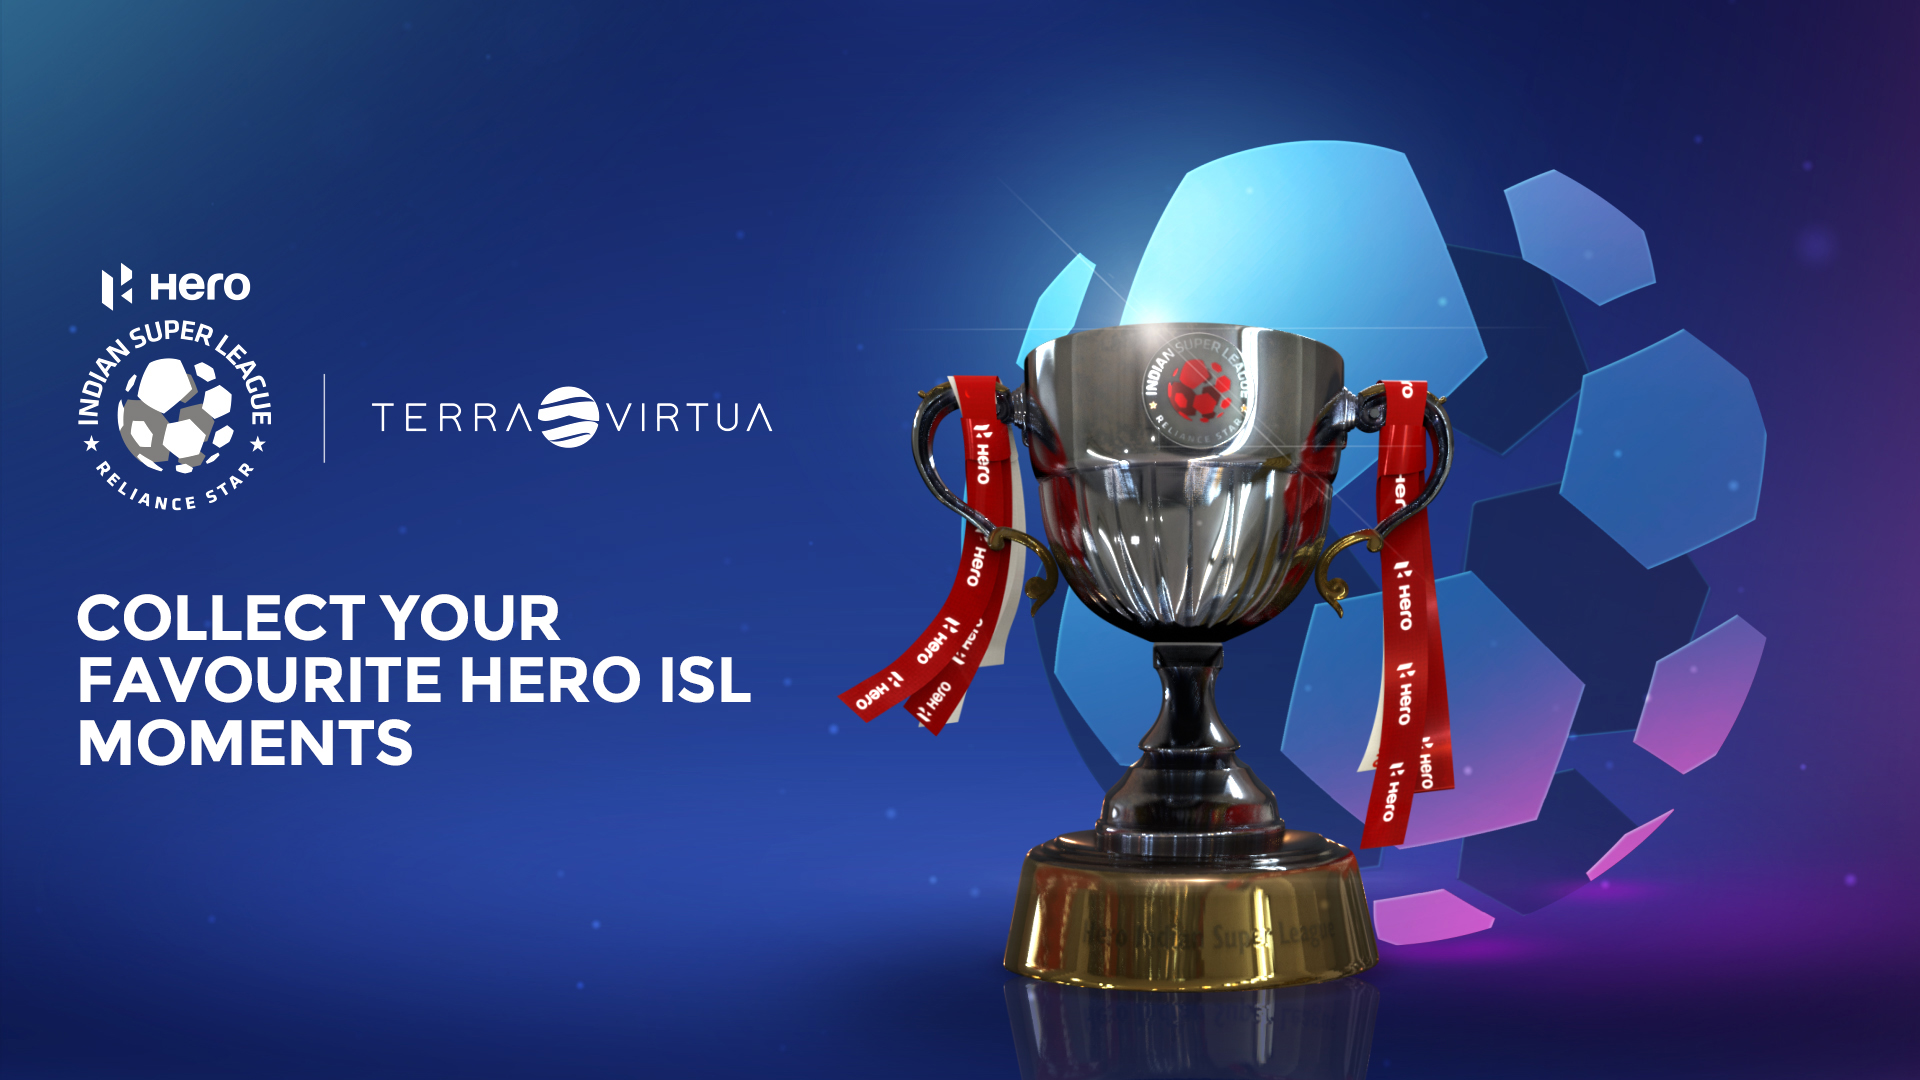 Hero ISL metaverse gets larger with new ‘Moments’ collection Pragativadi